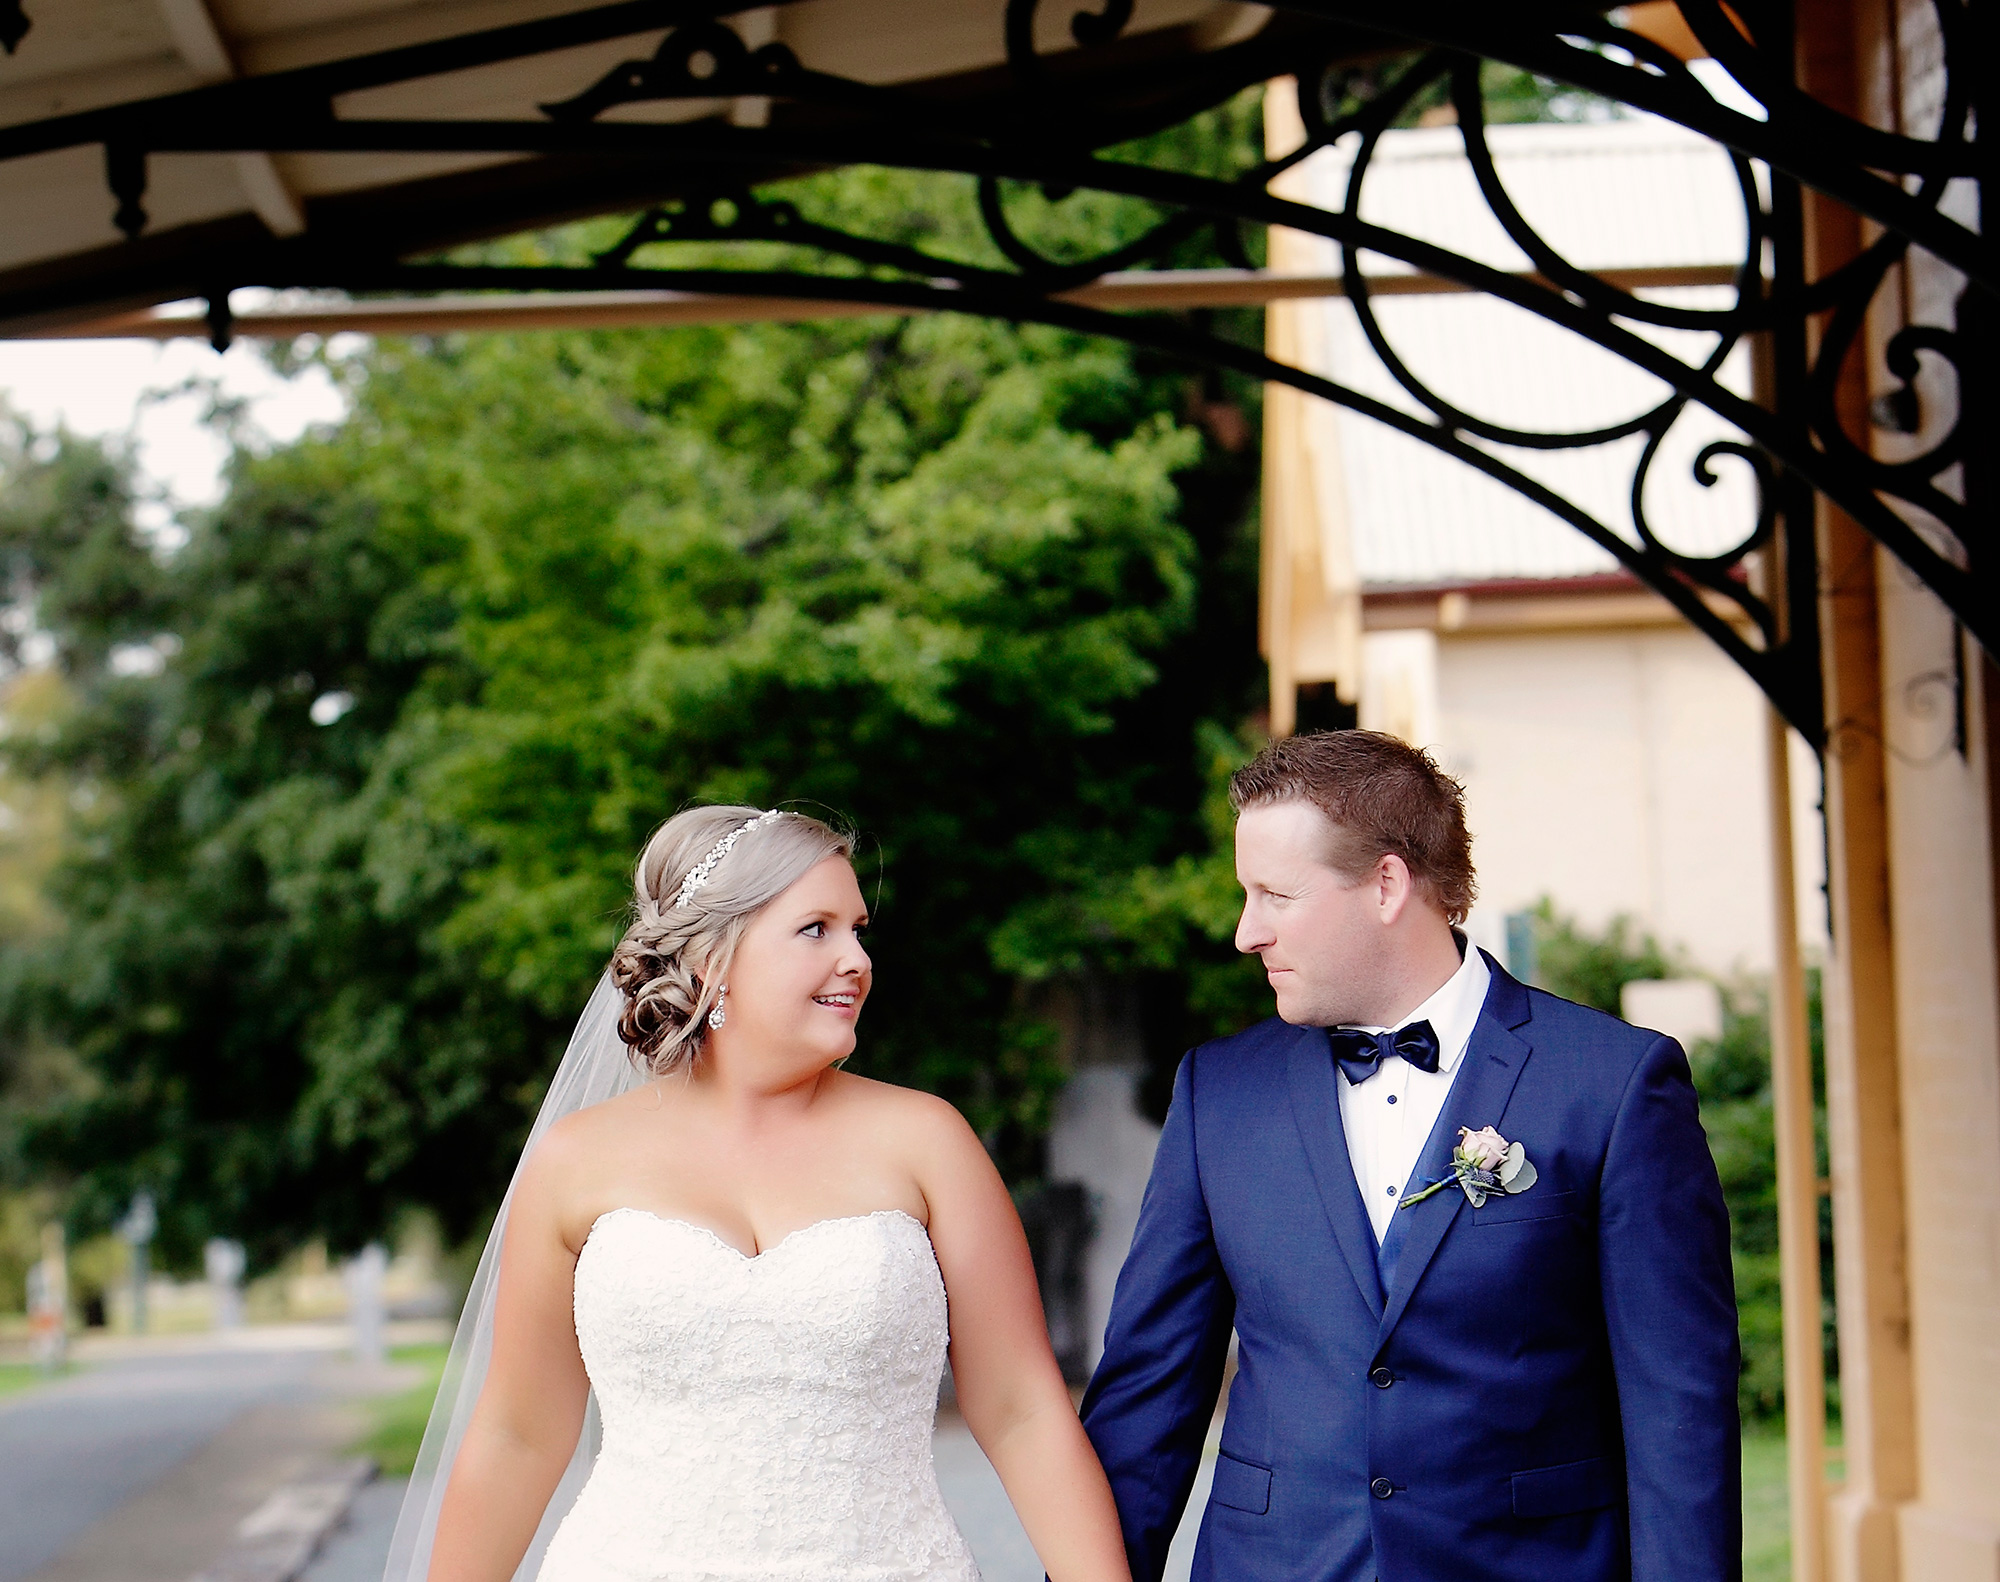 Jayne_Damian_Classic-Country-Wedding_Leanne-Whitley-Photography_010